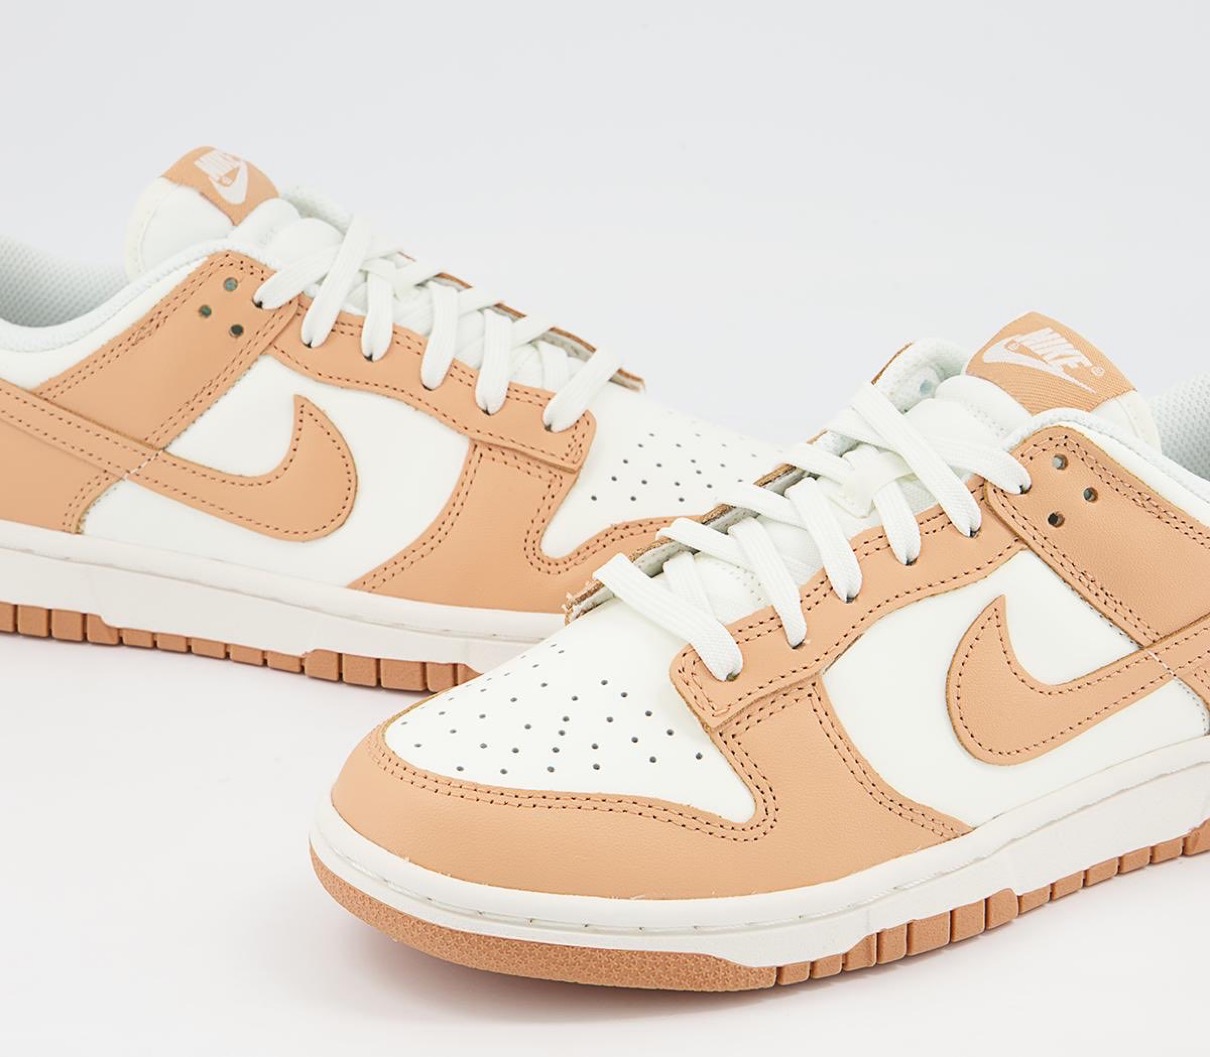 Nike Wmns Dunk Low “Harvest Moon”が国内2月4日に発売予定 | UP TO DATE